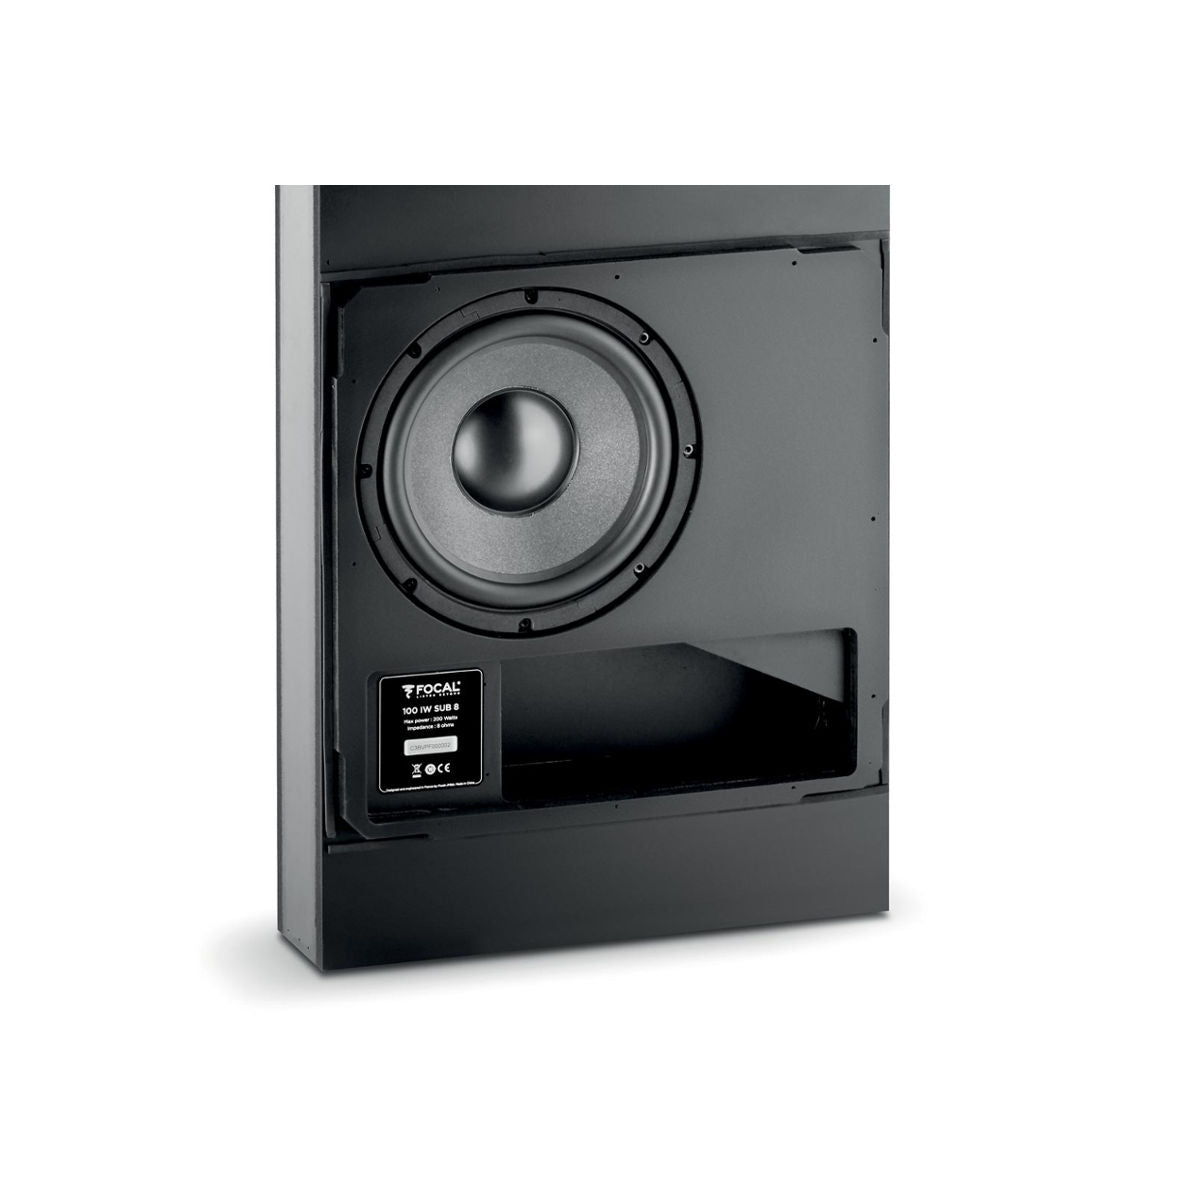 Focal 100 IW SUB8 Passive Subwoofer - Ooberpad